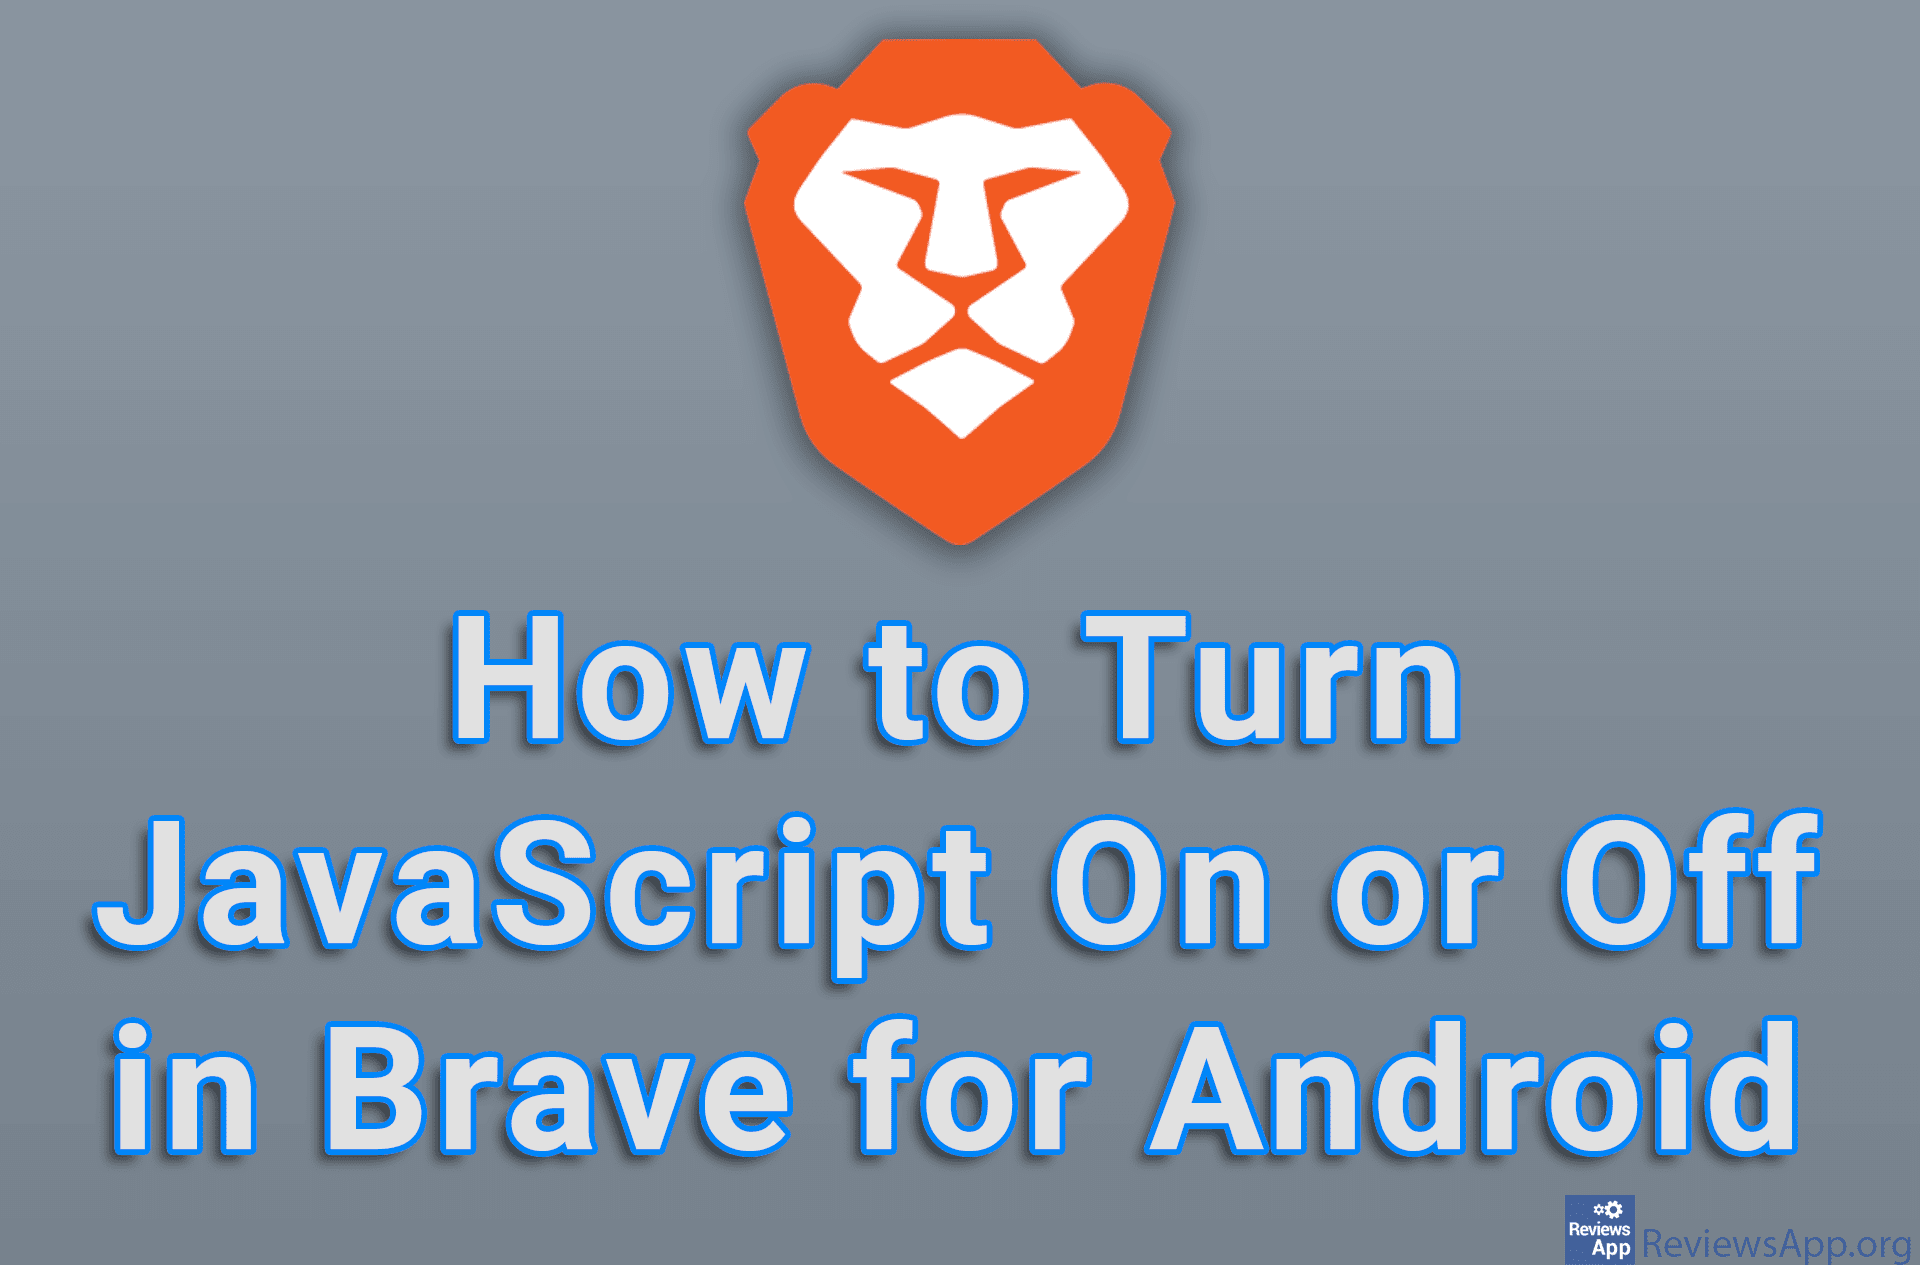 How to Turn JavaScript On or Off in Brave for Android